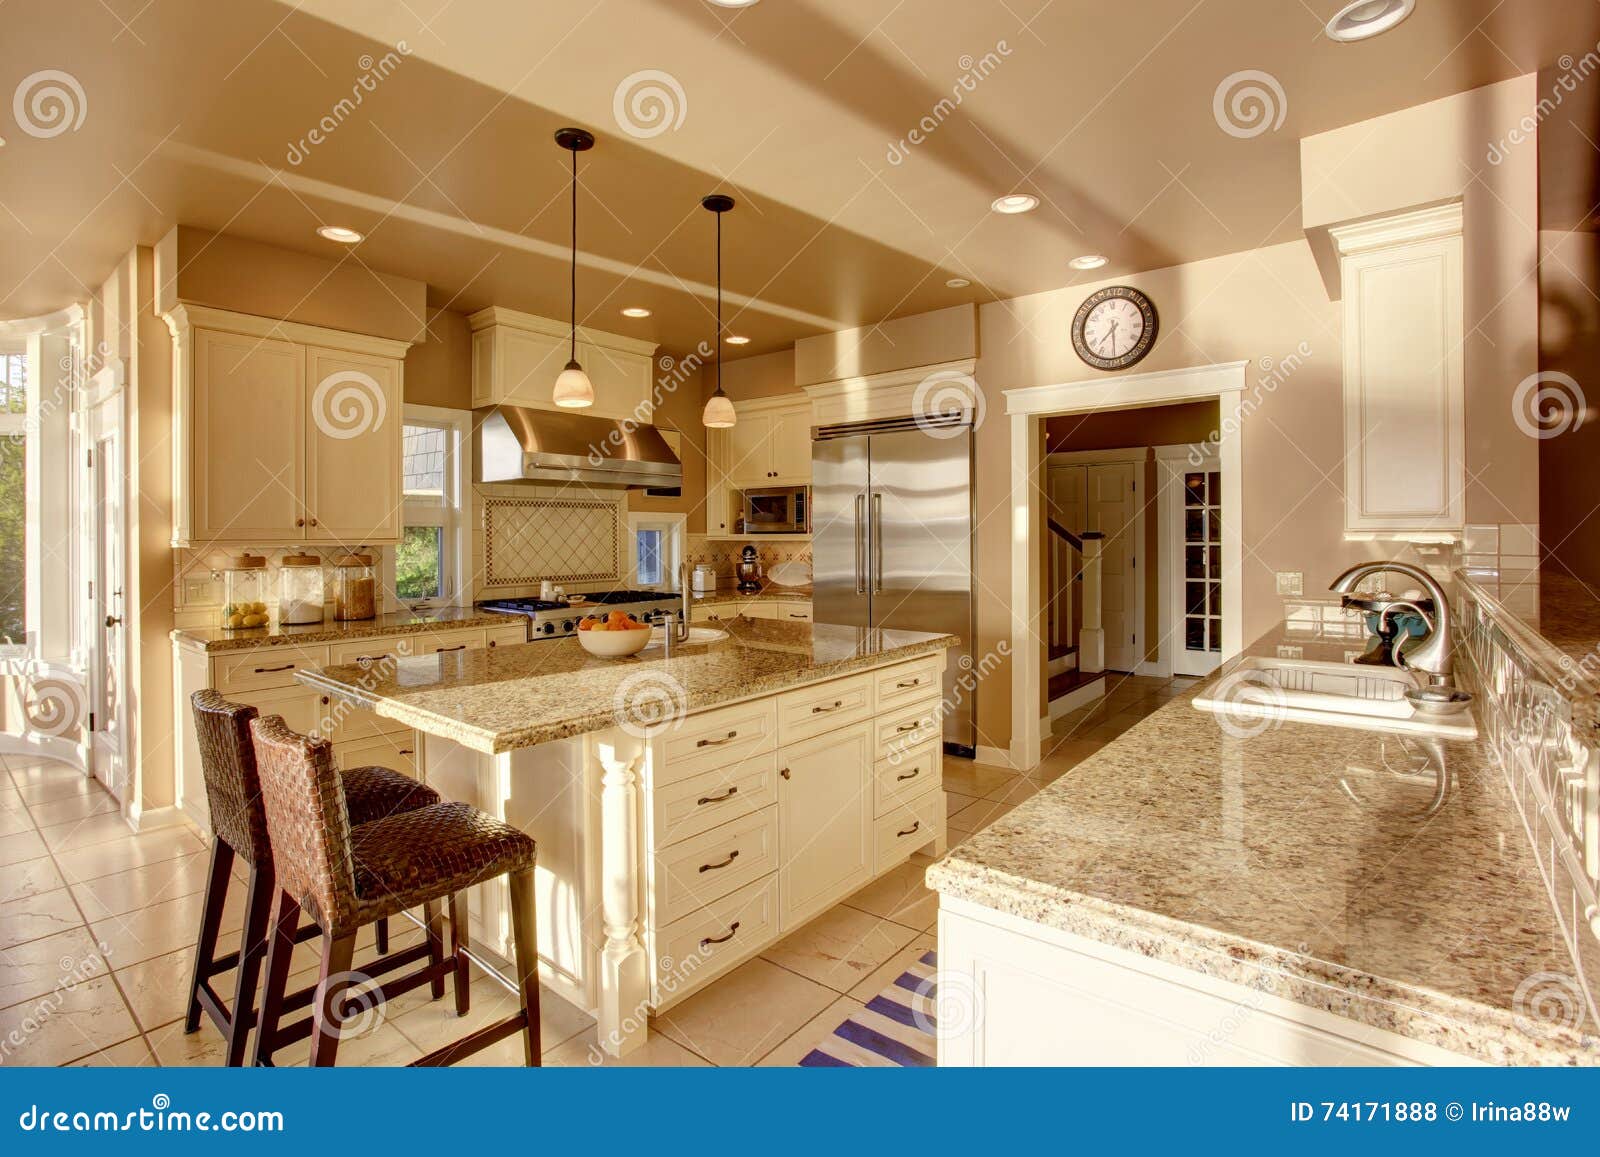 Large Luxury Kitchen Room In Beige Colors With Granite Counter